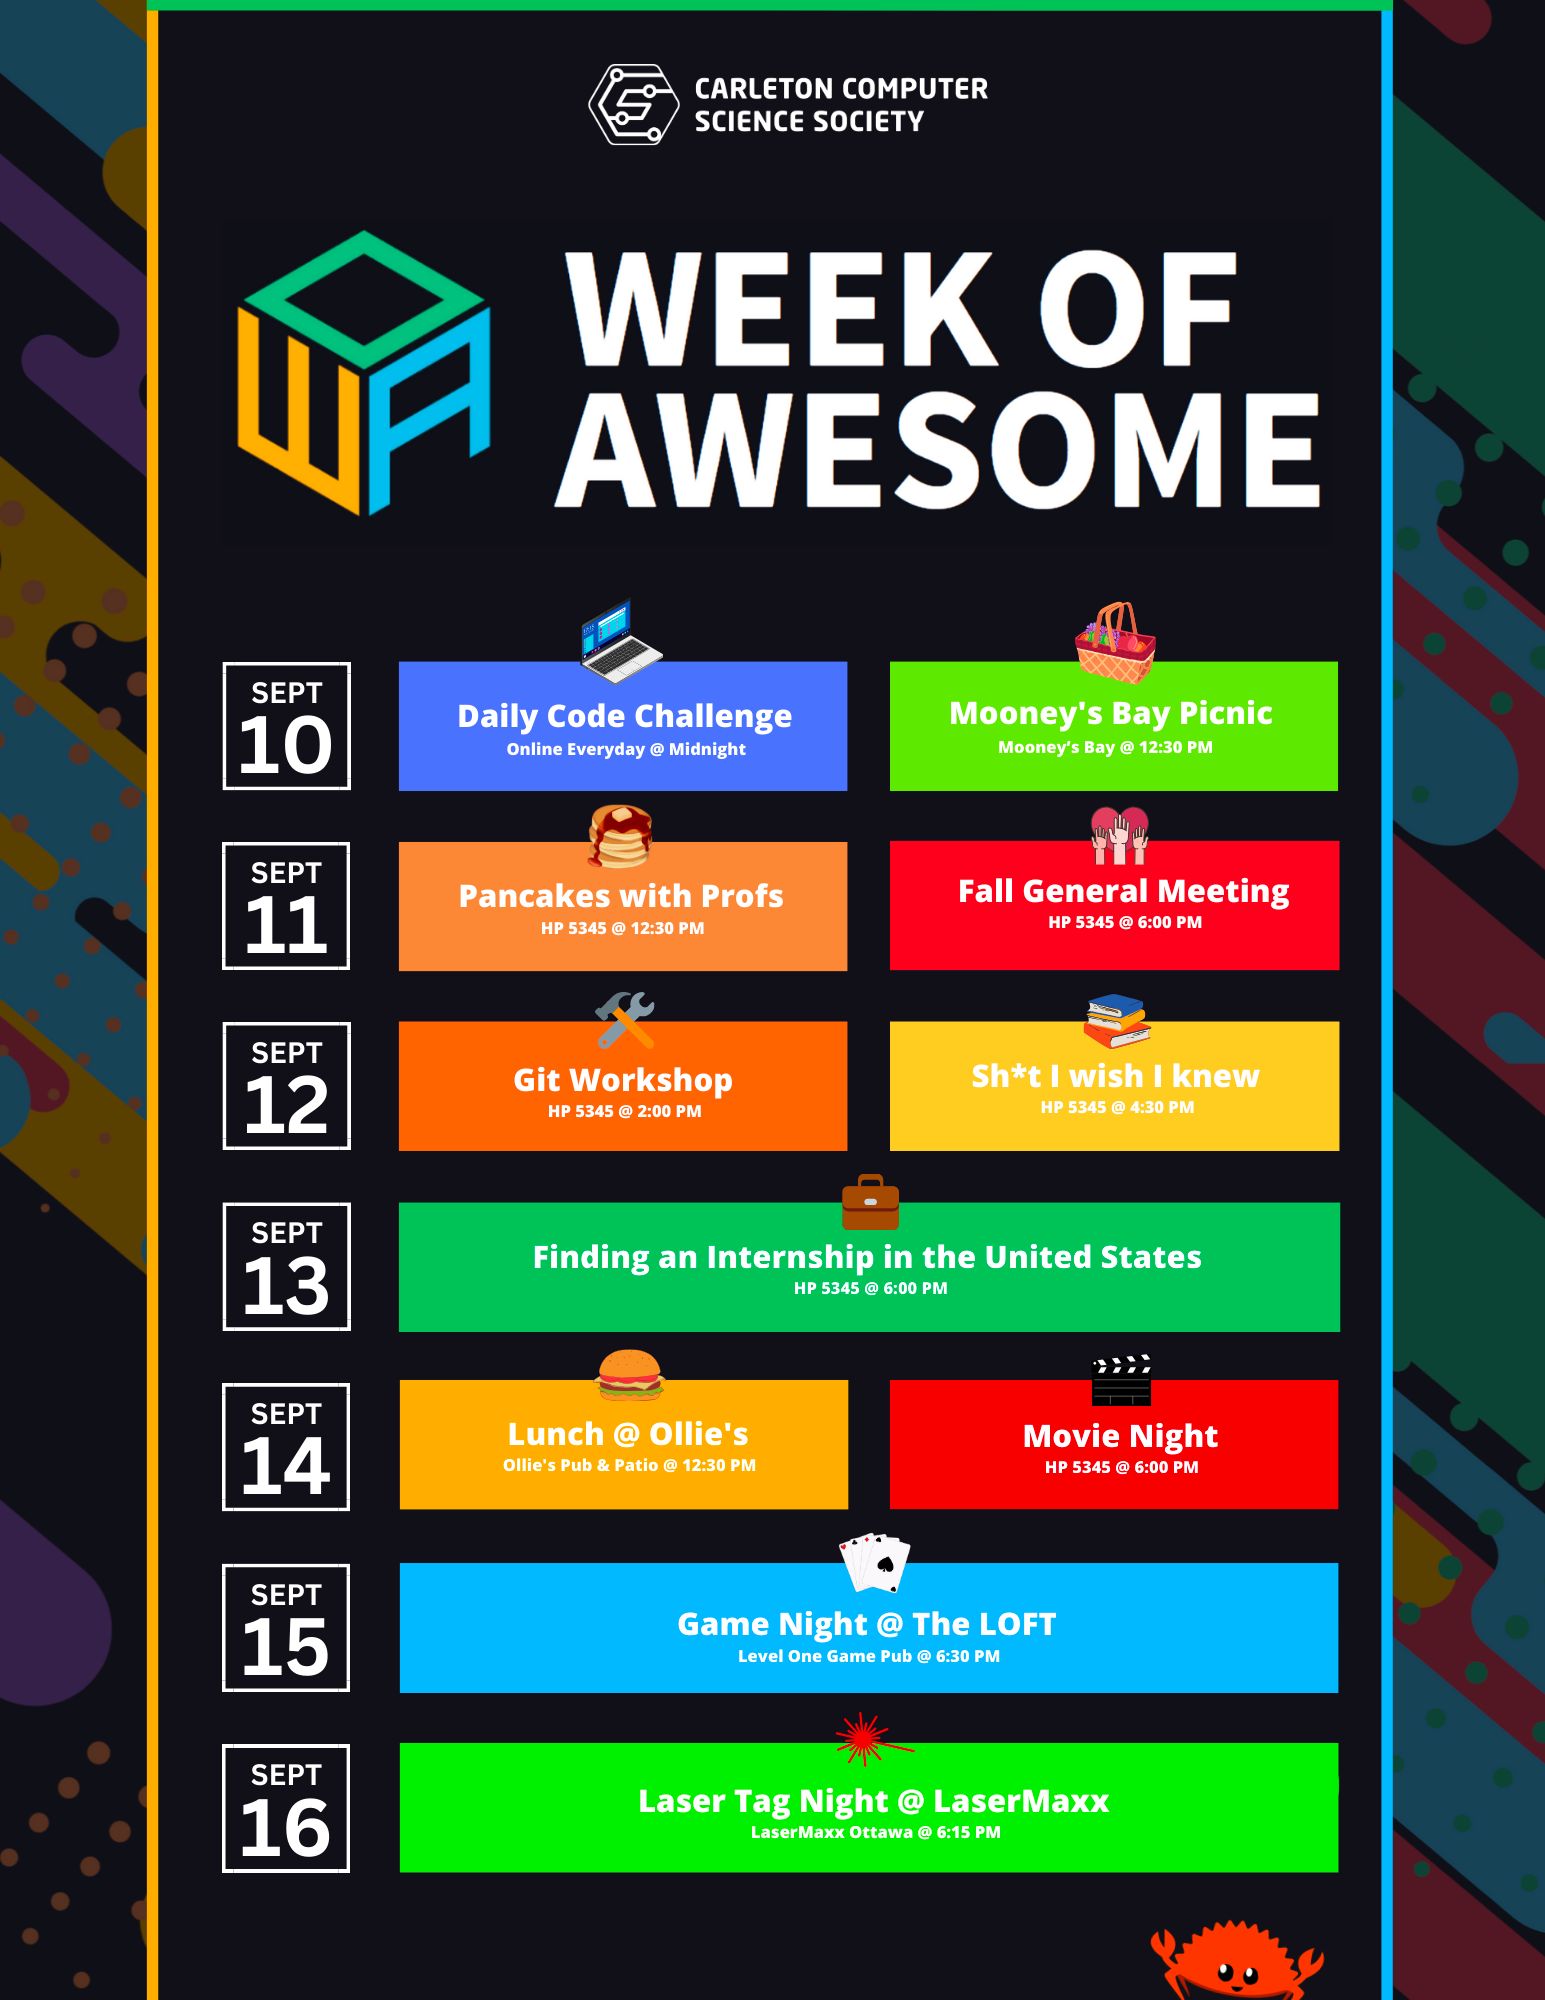 Week of Awesome